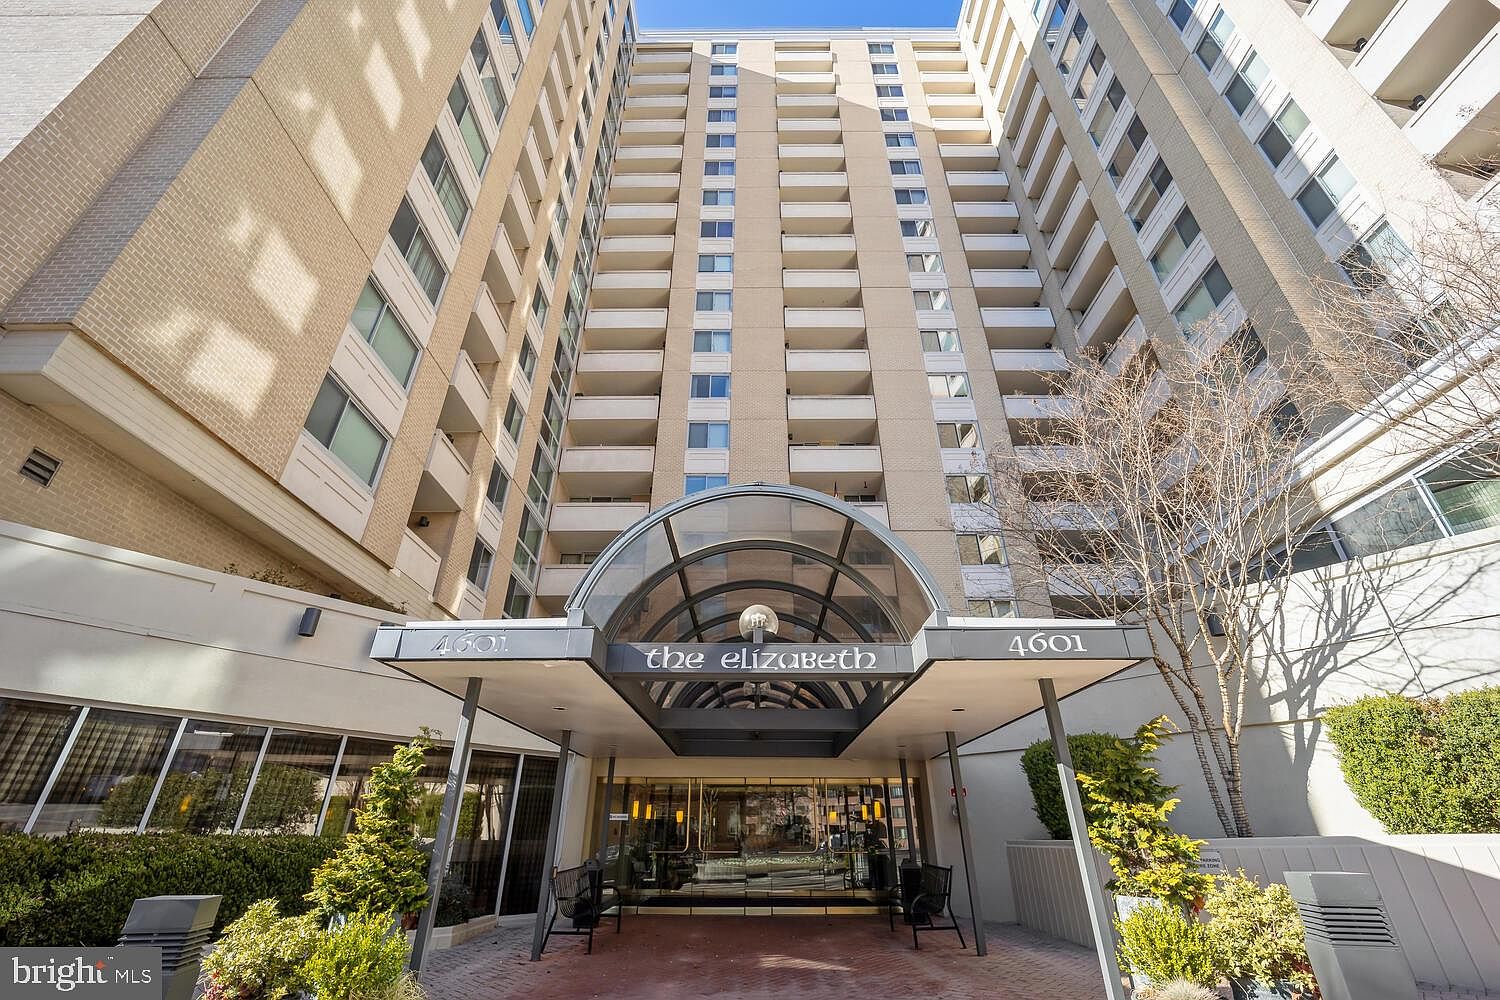 4601 N Park Ave APT 308-H, Chevy Chase, MD 20815 | MLS #MDMC2086198 | Zillow